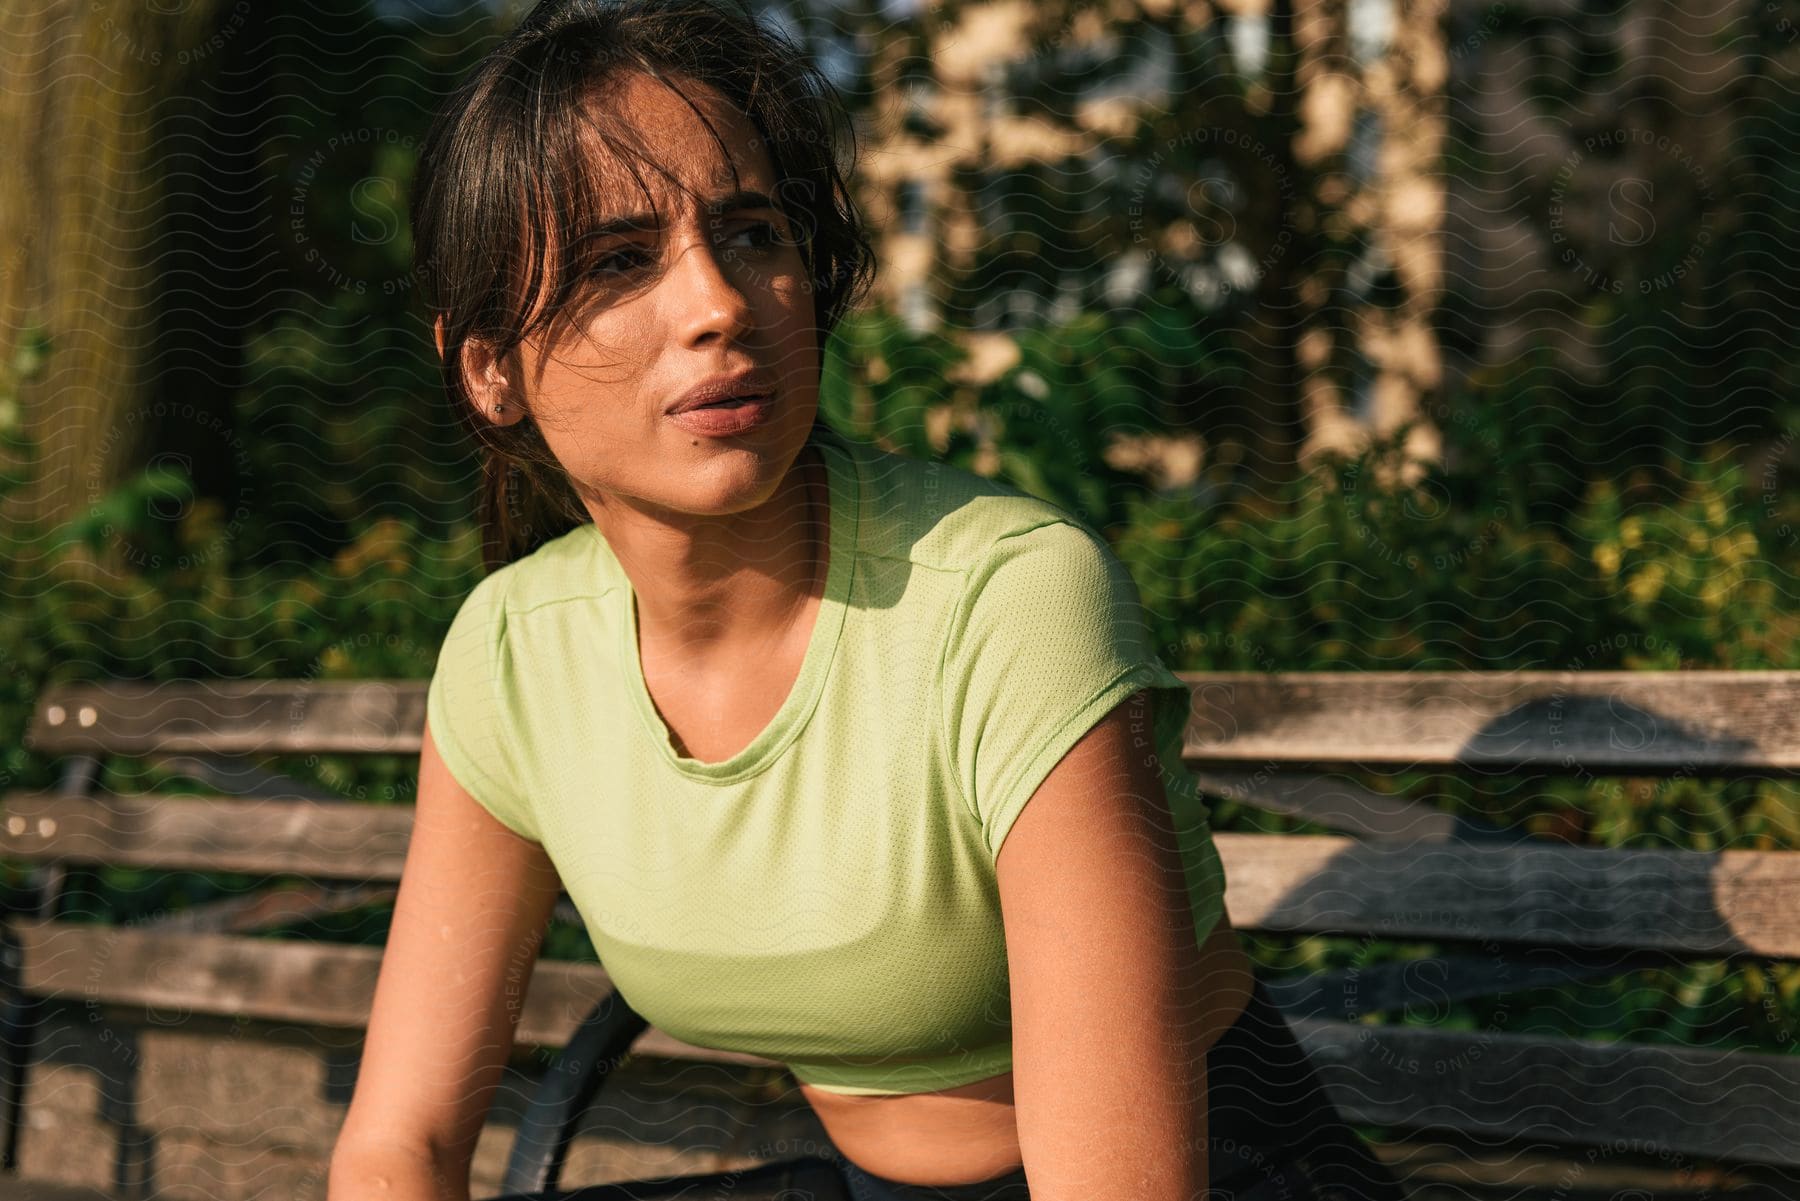 A woman in a green tank top sits on a park bench looking to the side